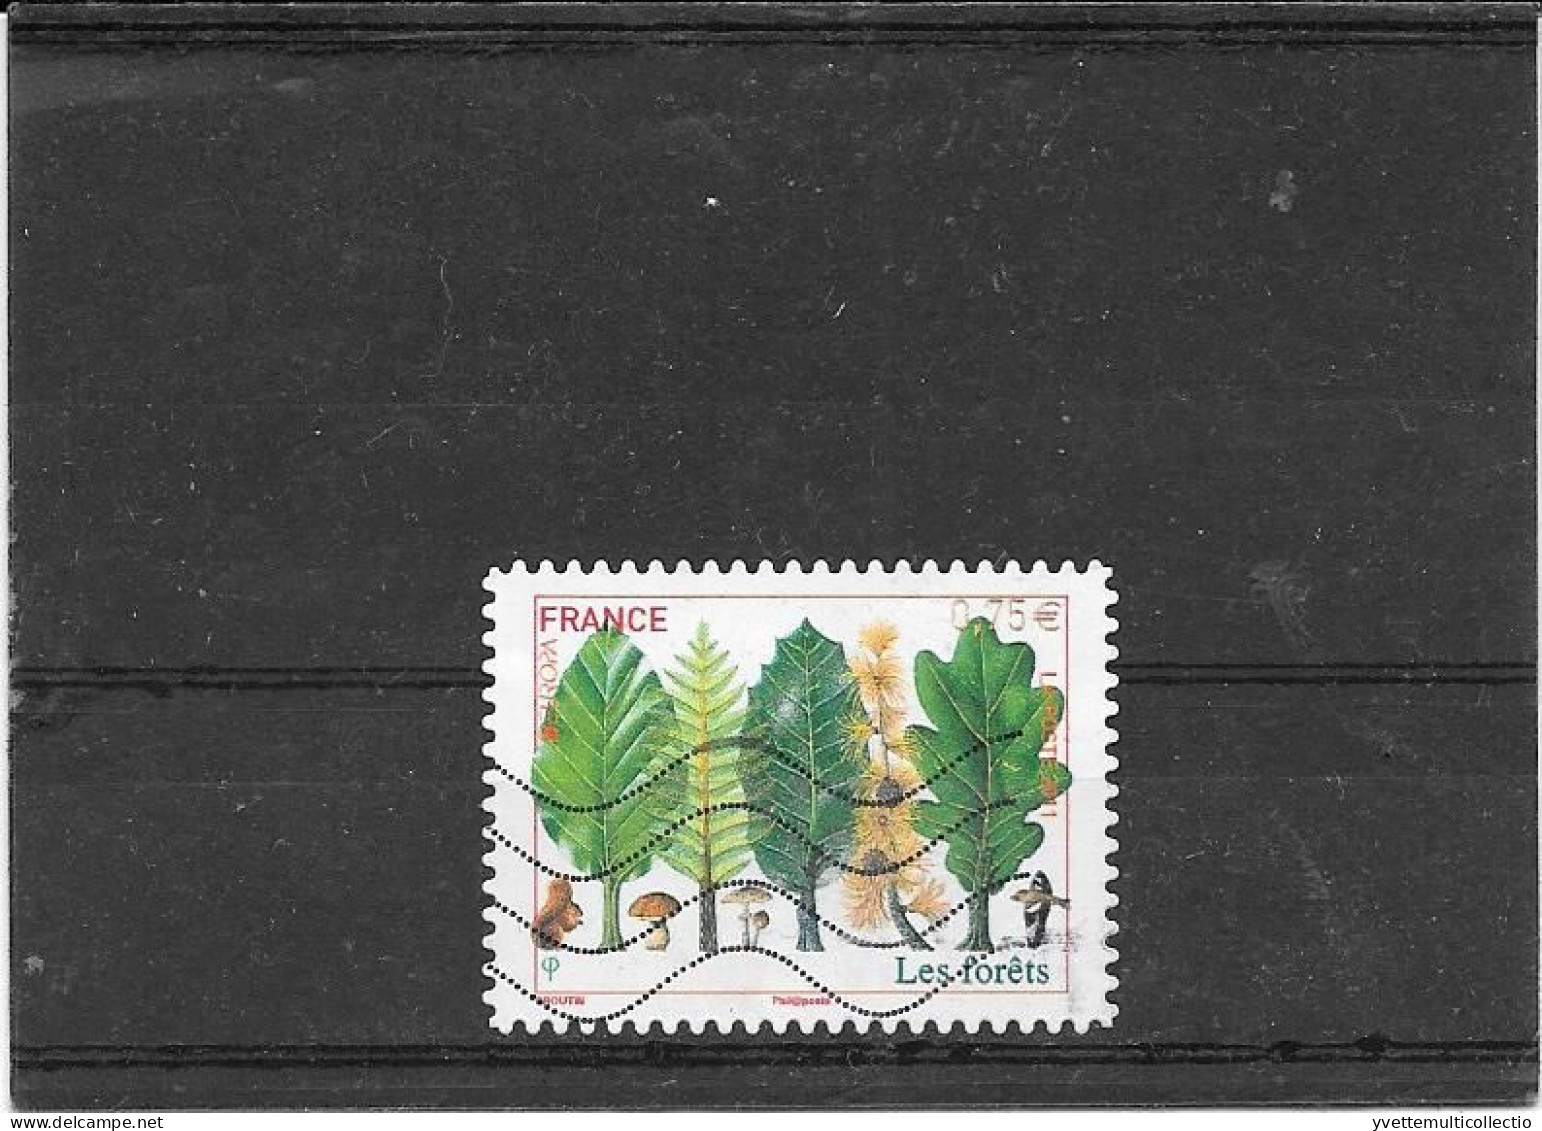 FRANCE 2011  EUROPA  LES FORÊTS  TIMBRE AUDHESIF OBLITERE  Y&T: N° 564 - Used Stamps